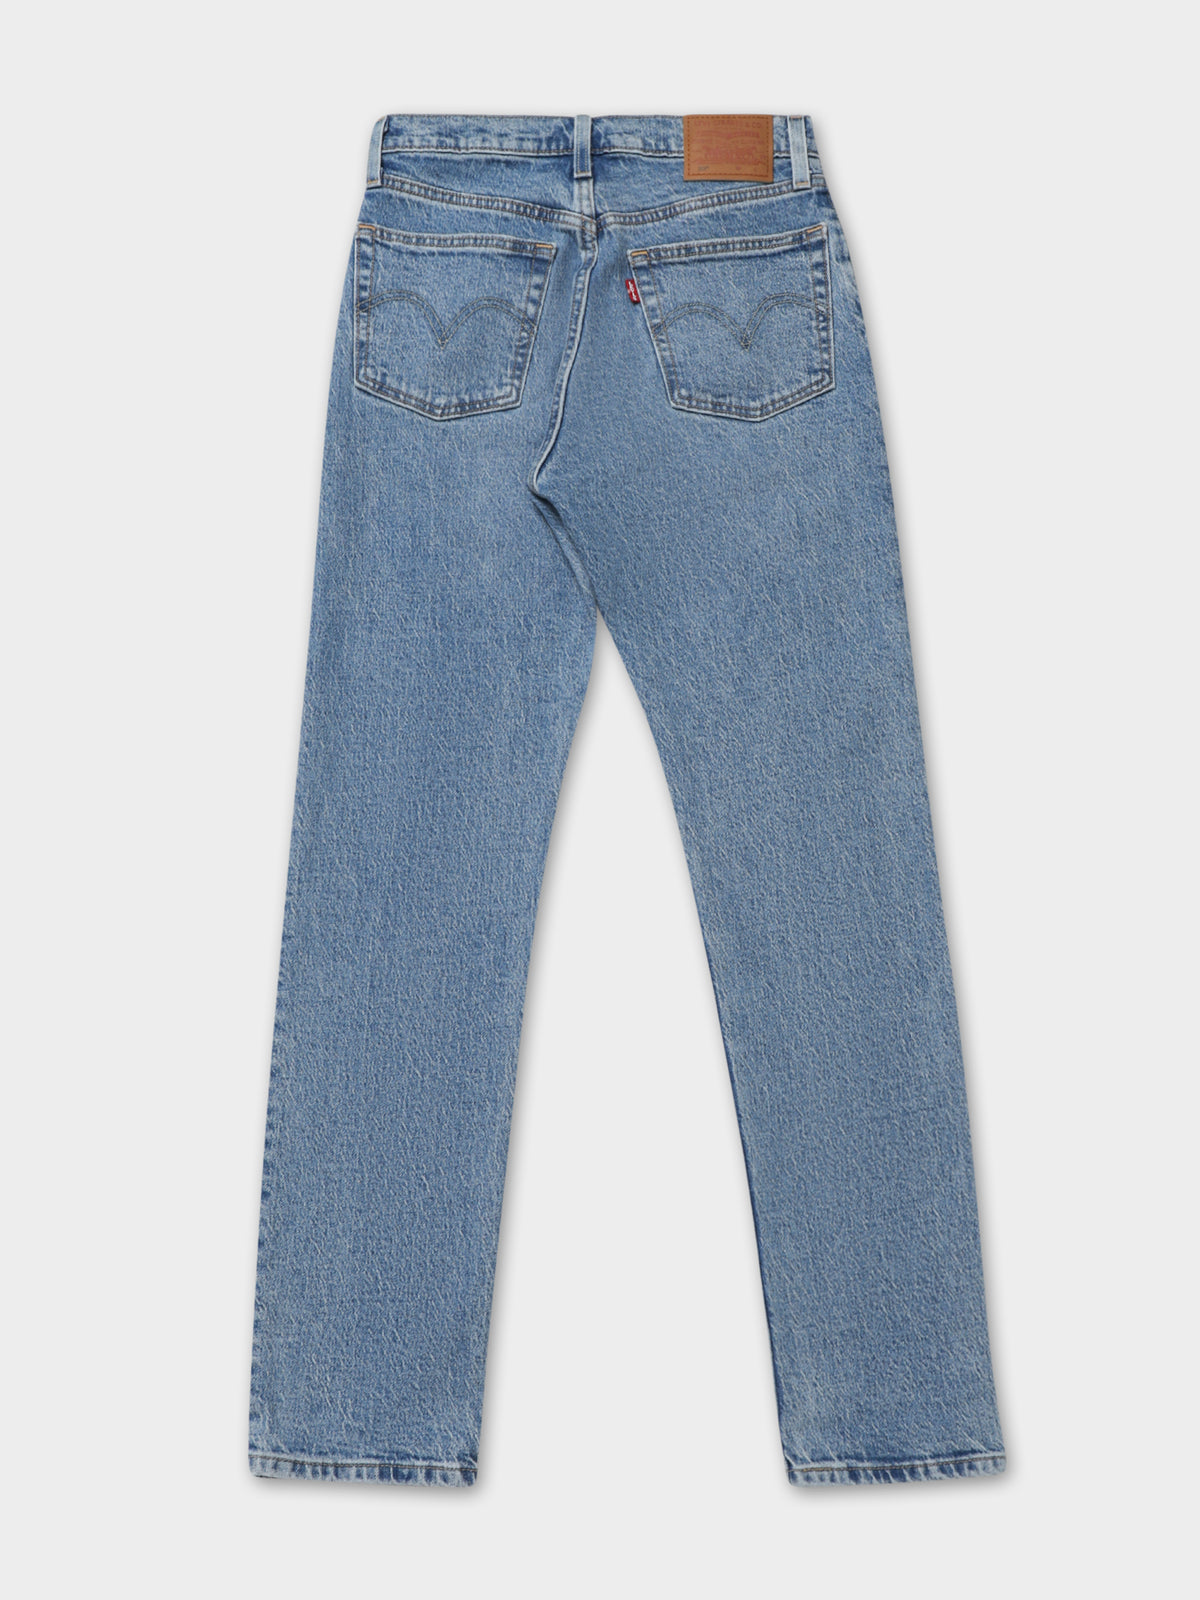 501 Original Jeans in Hollow Days Blue